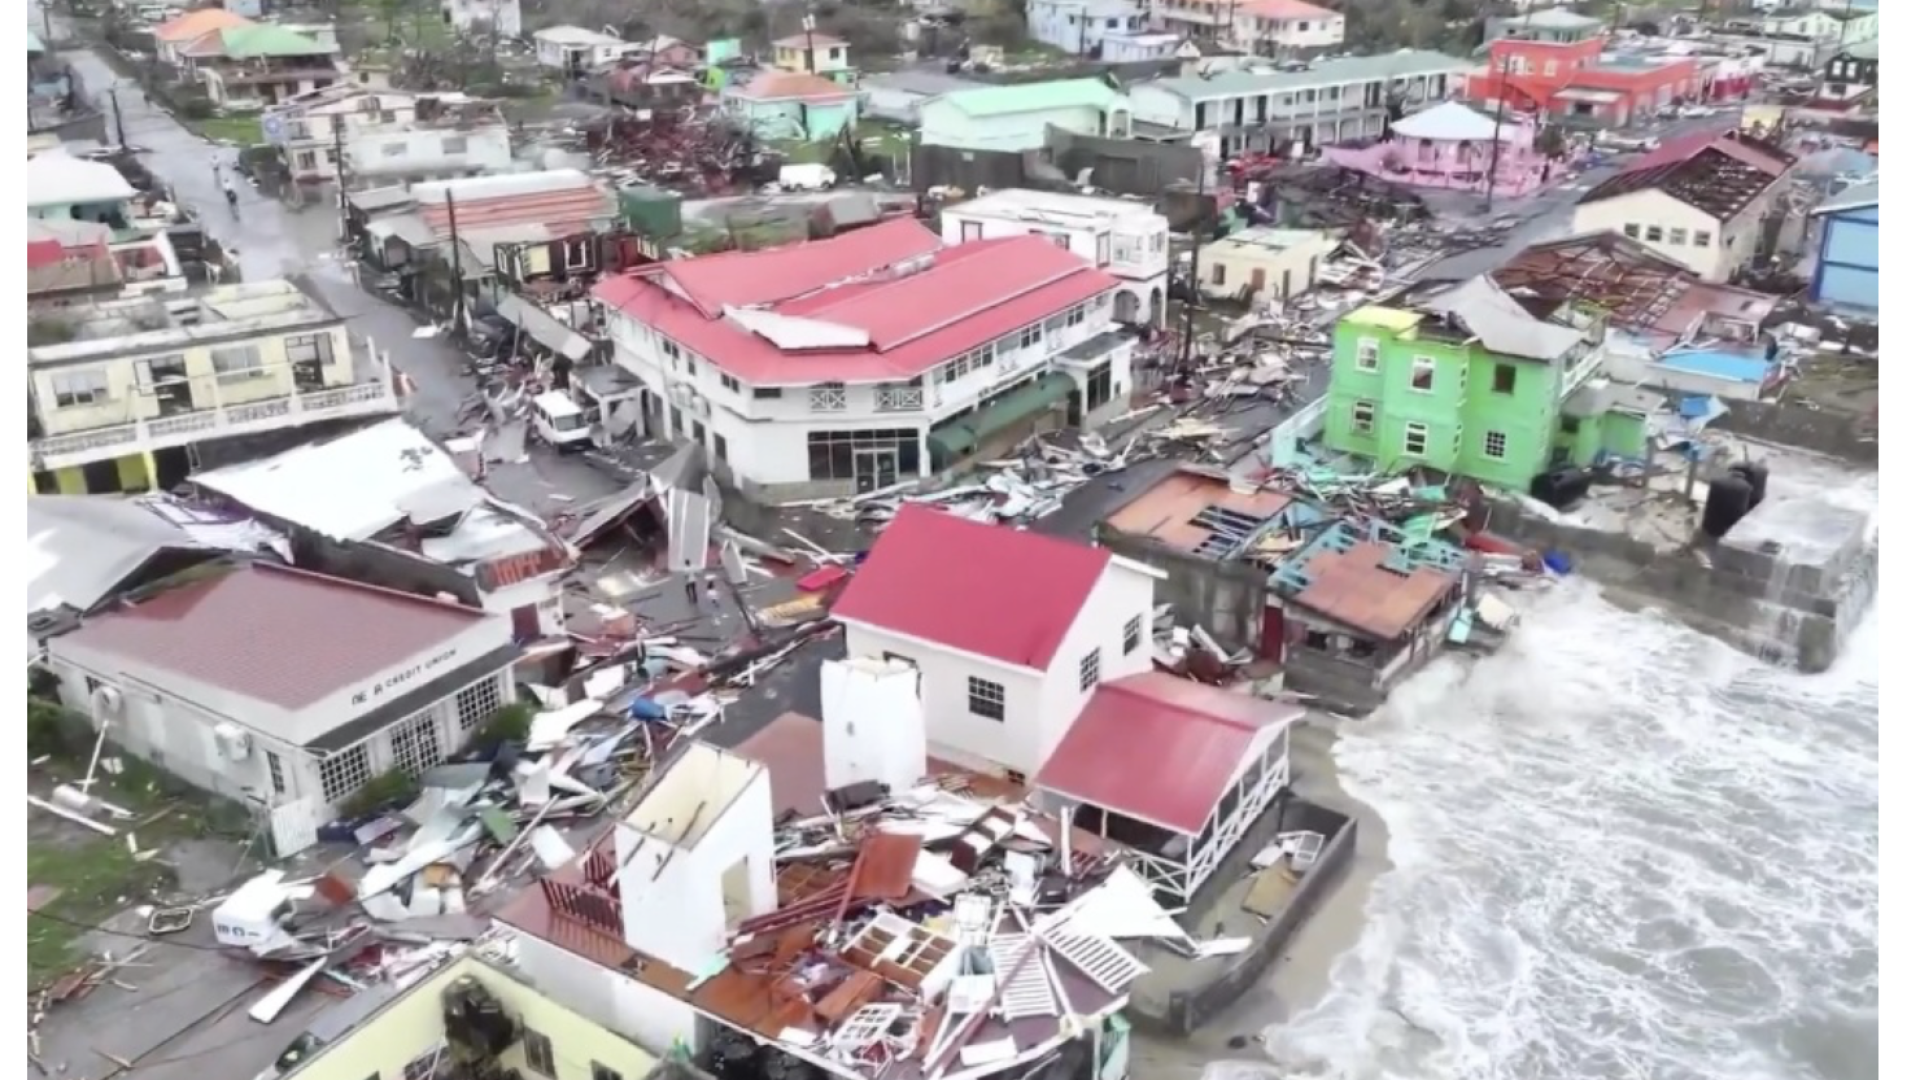 "We Are In Dire Need Of Help": Hurricane Beryl Leaves Trail Of Devastation In The Caribbean